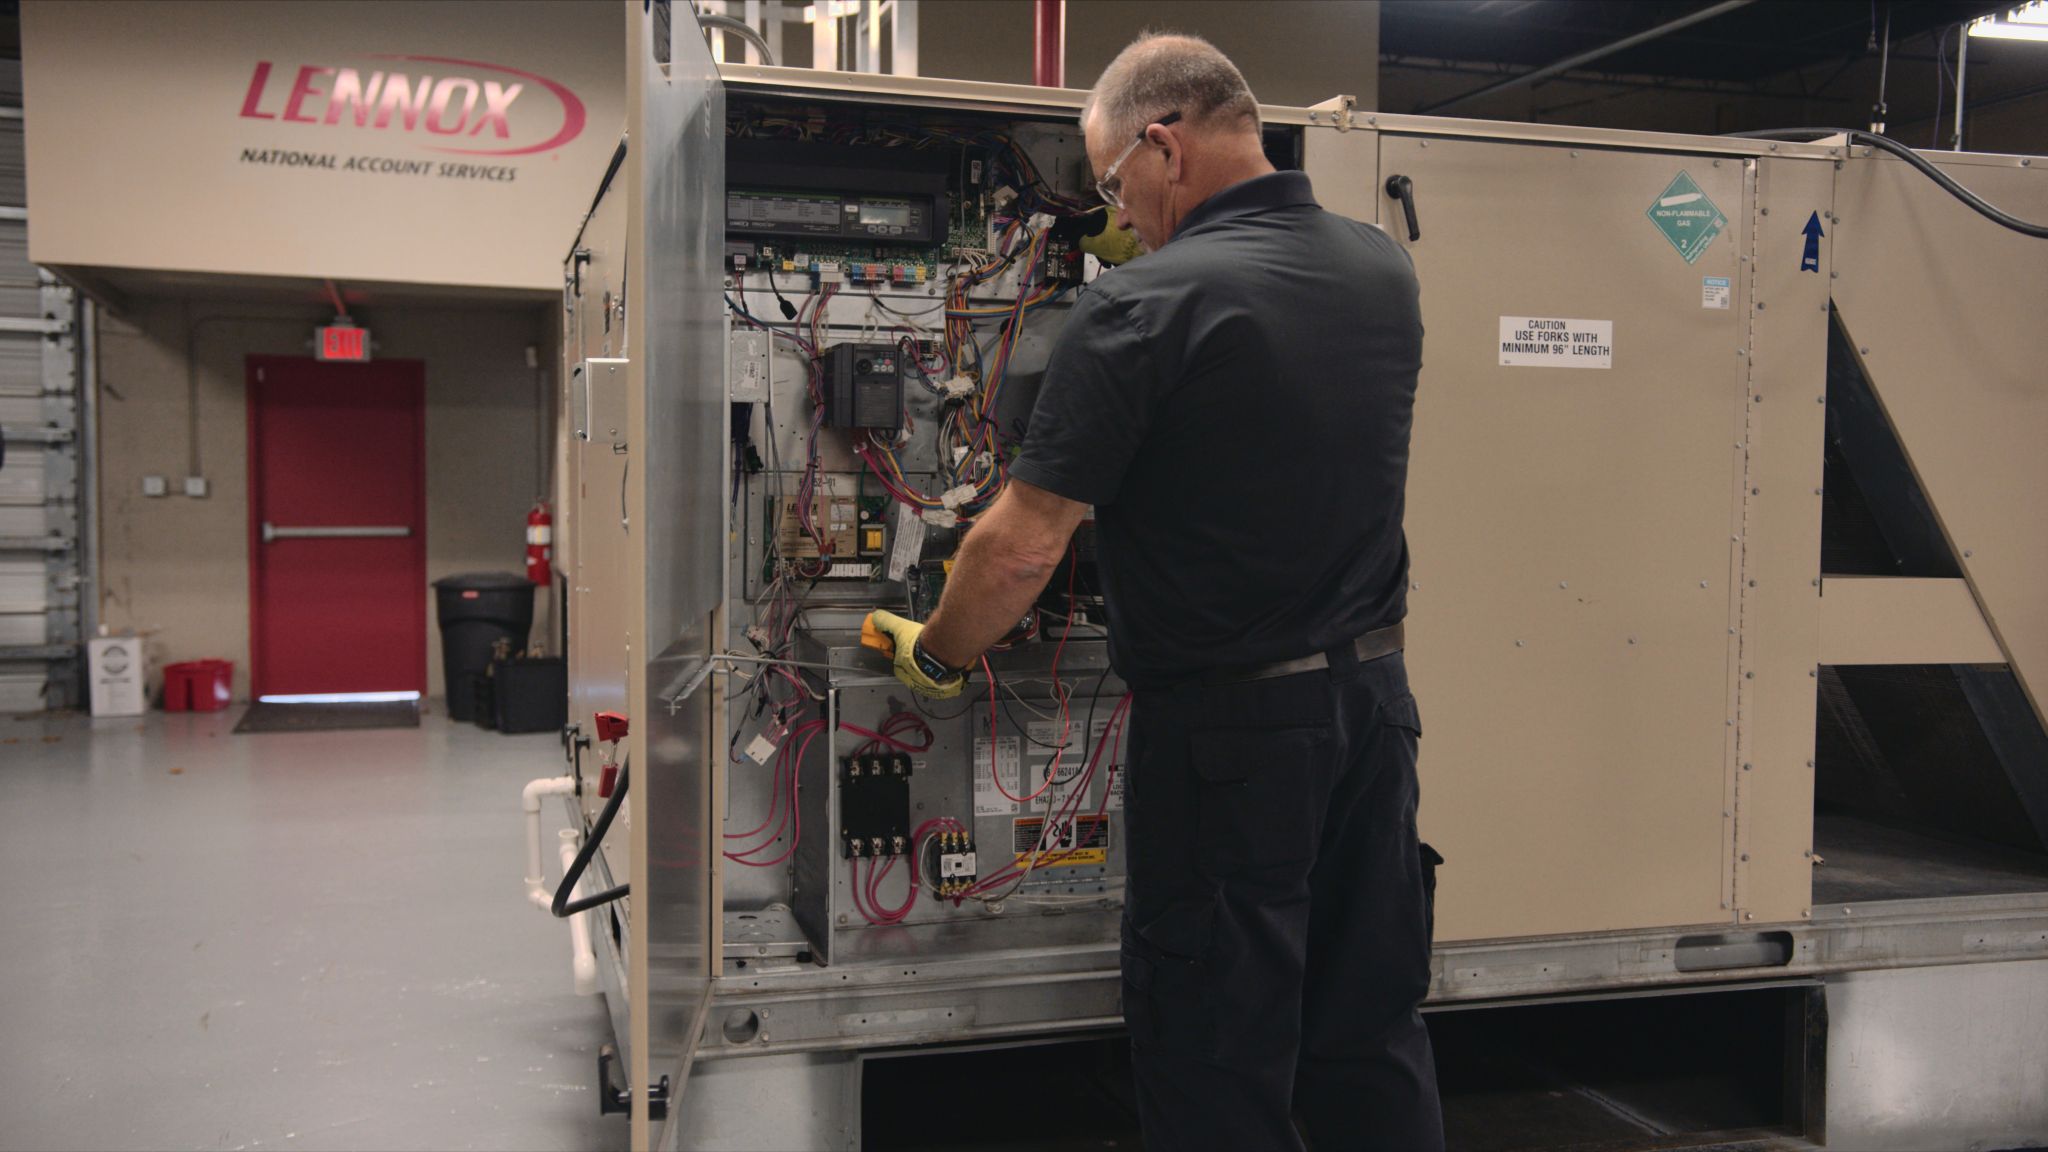 View from behind of man working on electronics in a container